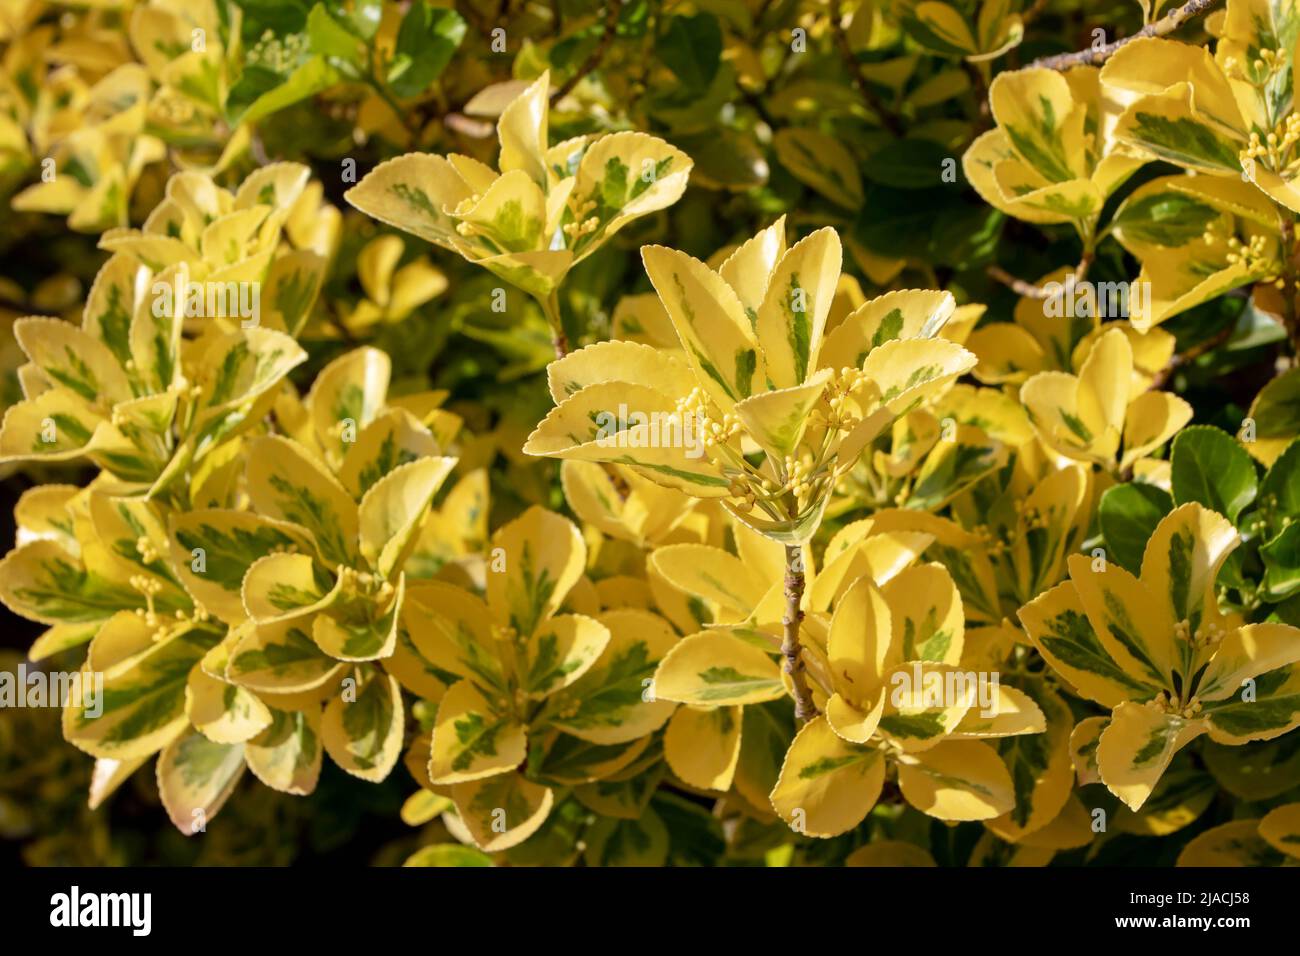 Euonymus japonicus Ovatus Aureus or Japanese Spindle Bush colourful shrub with golden yellow and green variegated foliage Stock Photo